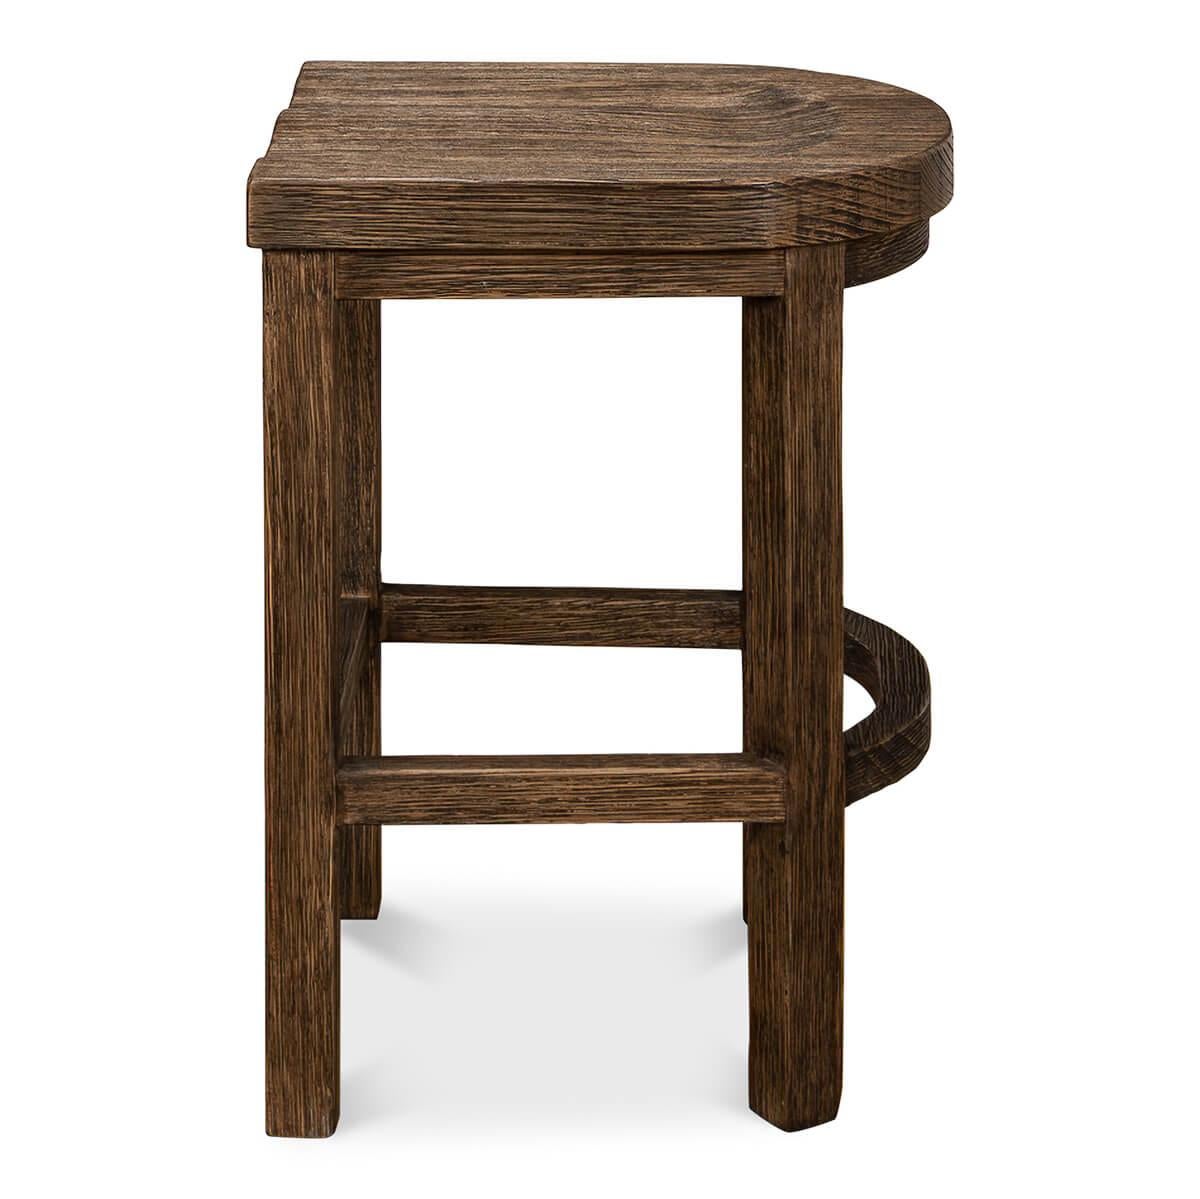 Bold Industrial counter stool, made of New Zealand Pine, the stool in a brown husk finish with a saddle seat for comfort on square column legs with a stretcher.

Dimensions: 19